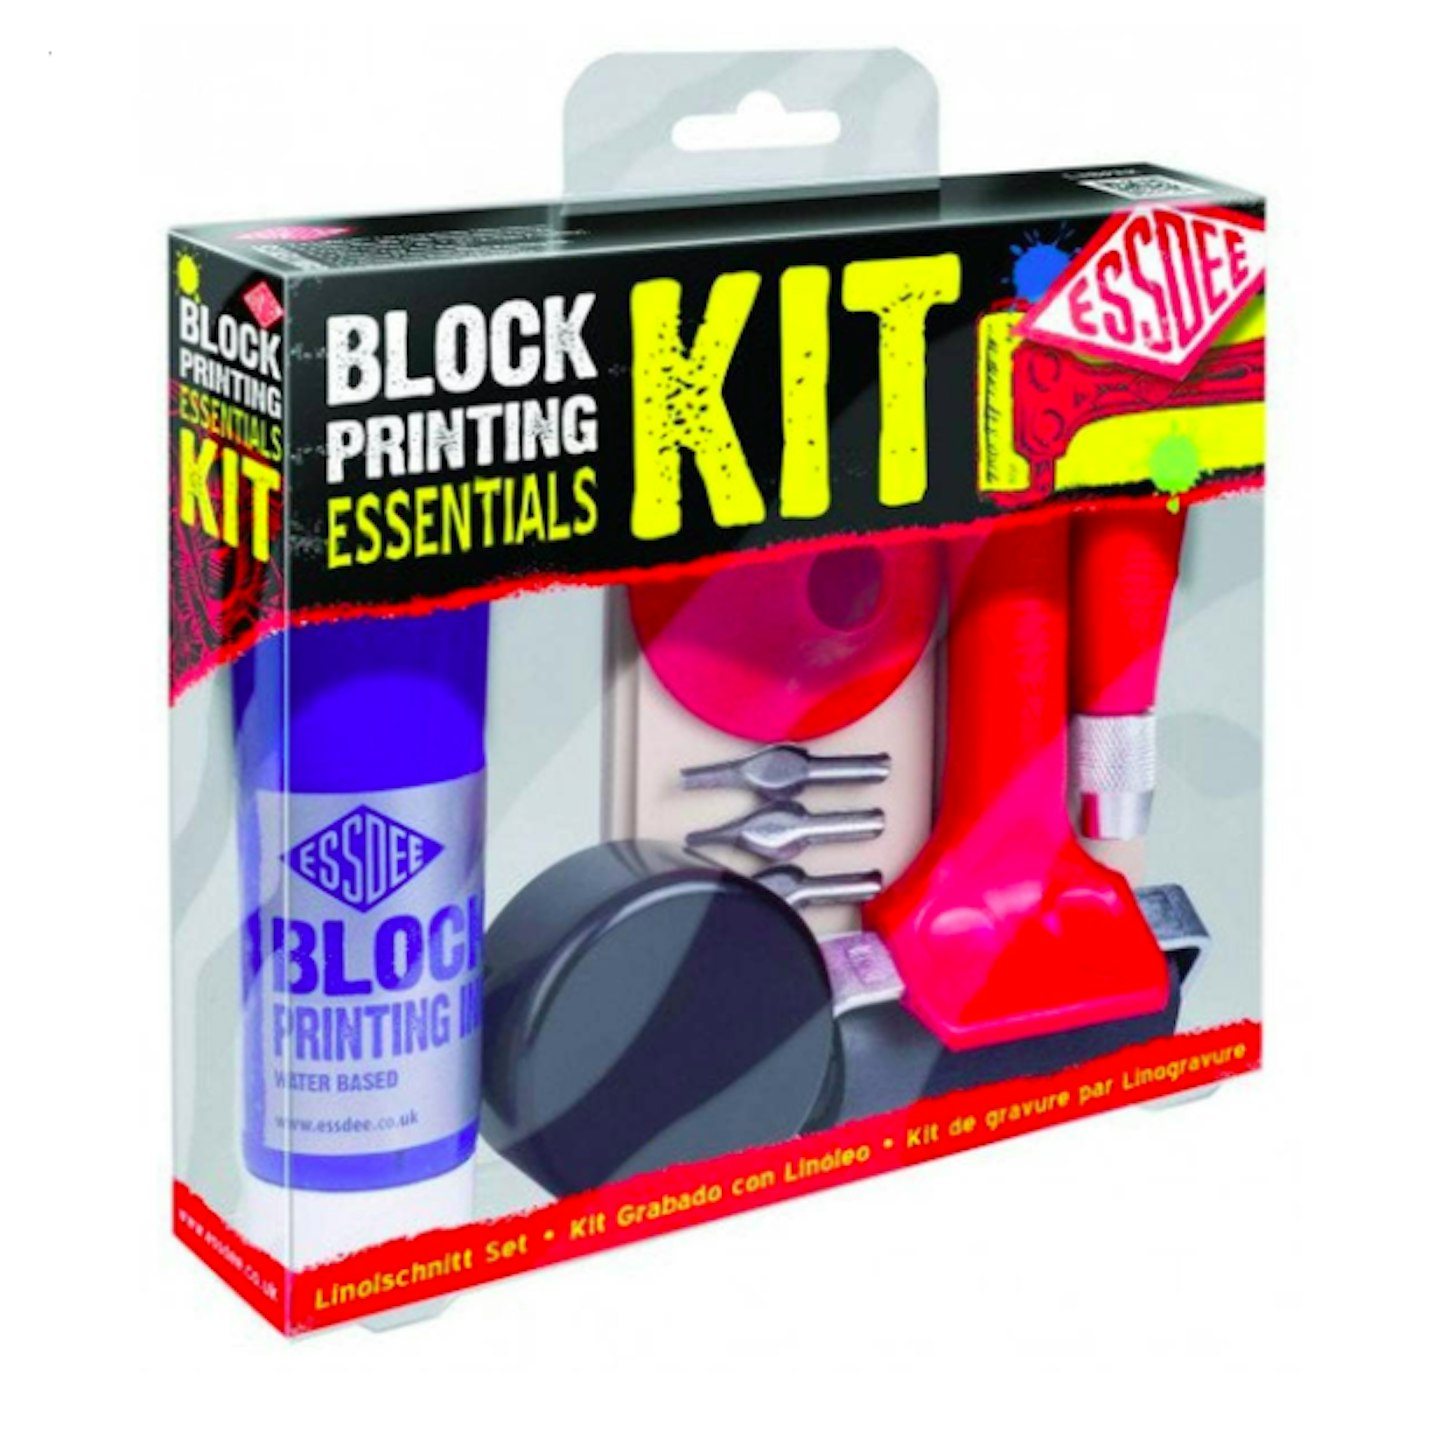 ESSDEE Block Printing Essentials Kit Includes 2 Ink Rollers, 3 Lino  Cutters, Lino Handle, Printing Ink and Carving Block || Used in Art, Craft  and